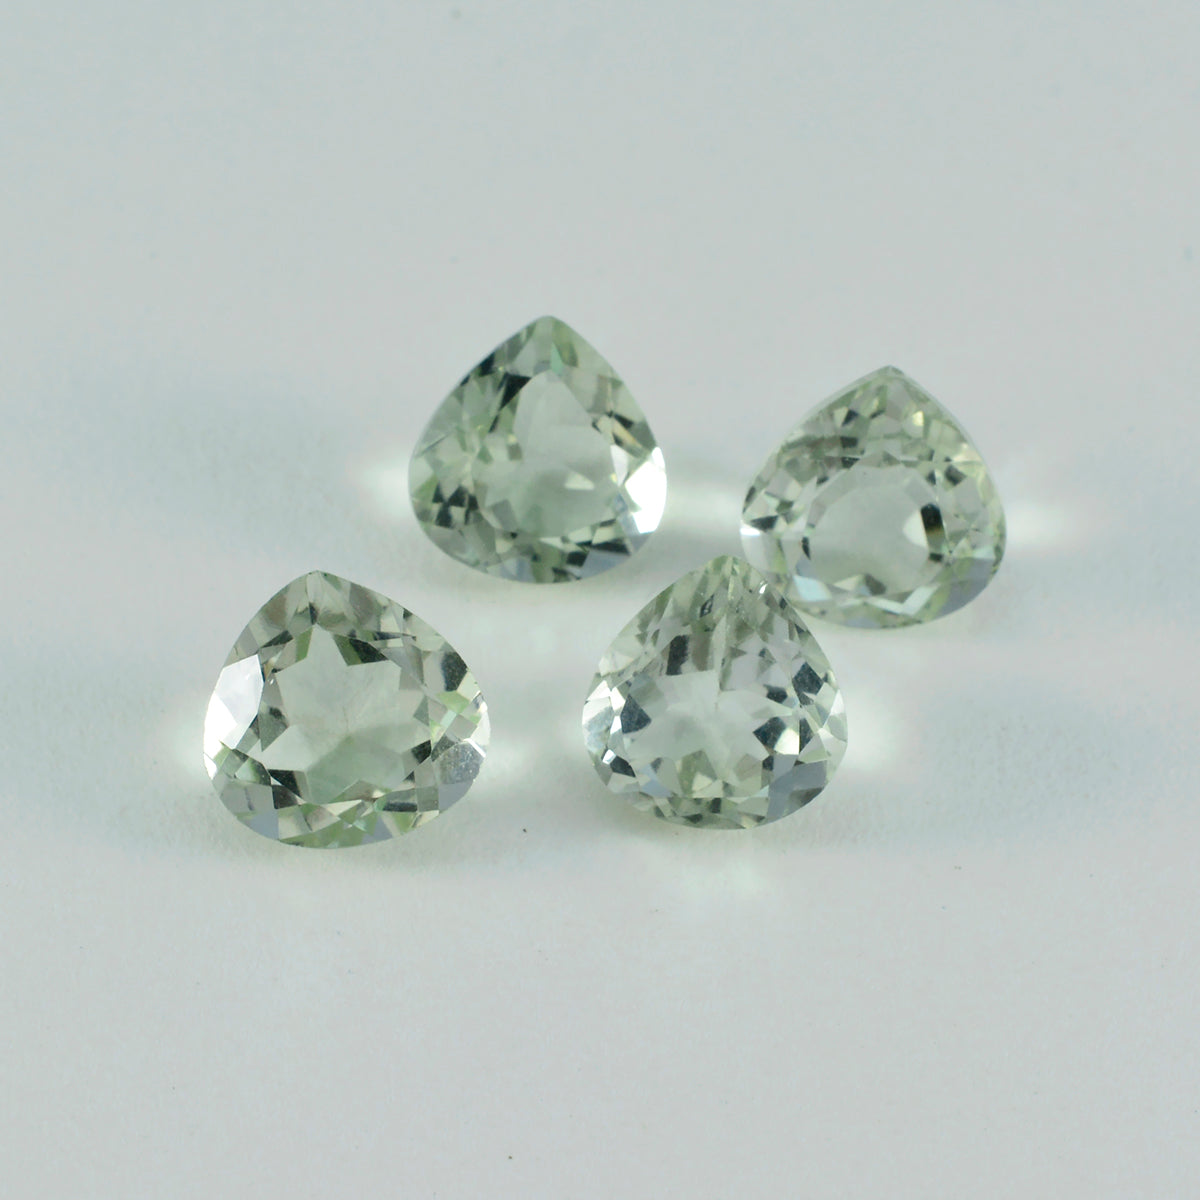 Riyogems 1PC Green Amethyst Faceted 7x7 mm Heart Shape AAA Quality Loose Stone